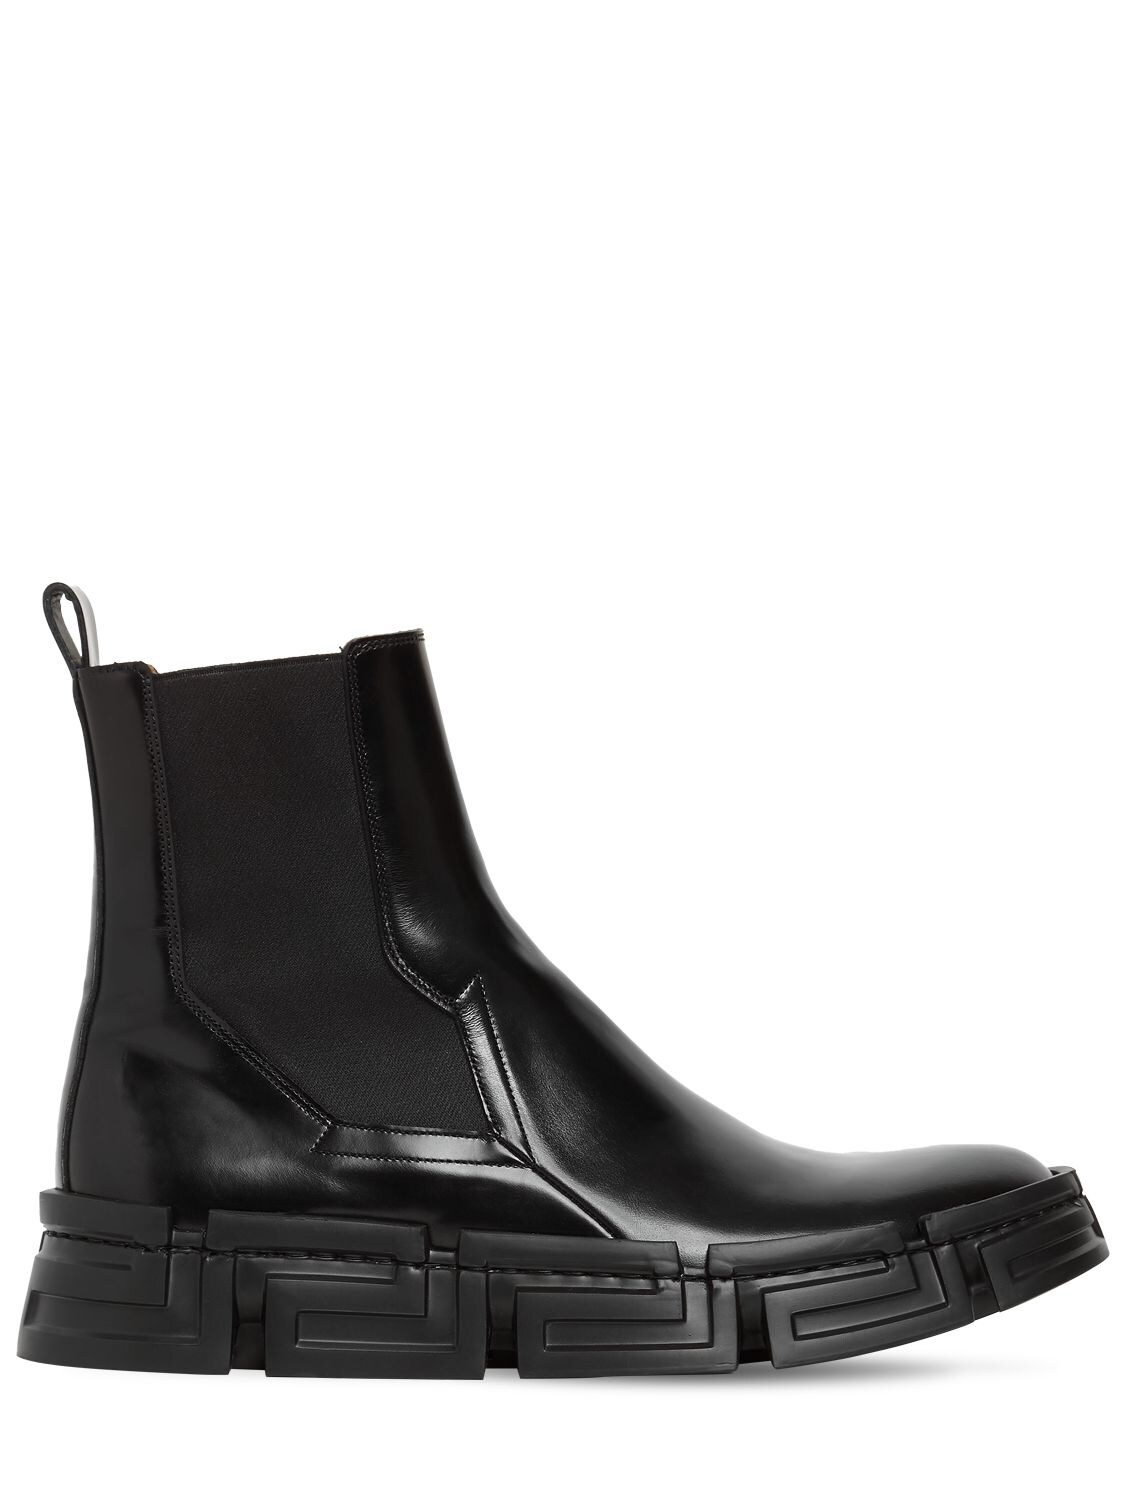 Versace Trigreca Sole Leather Chelsea Boots In Black